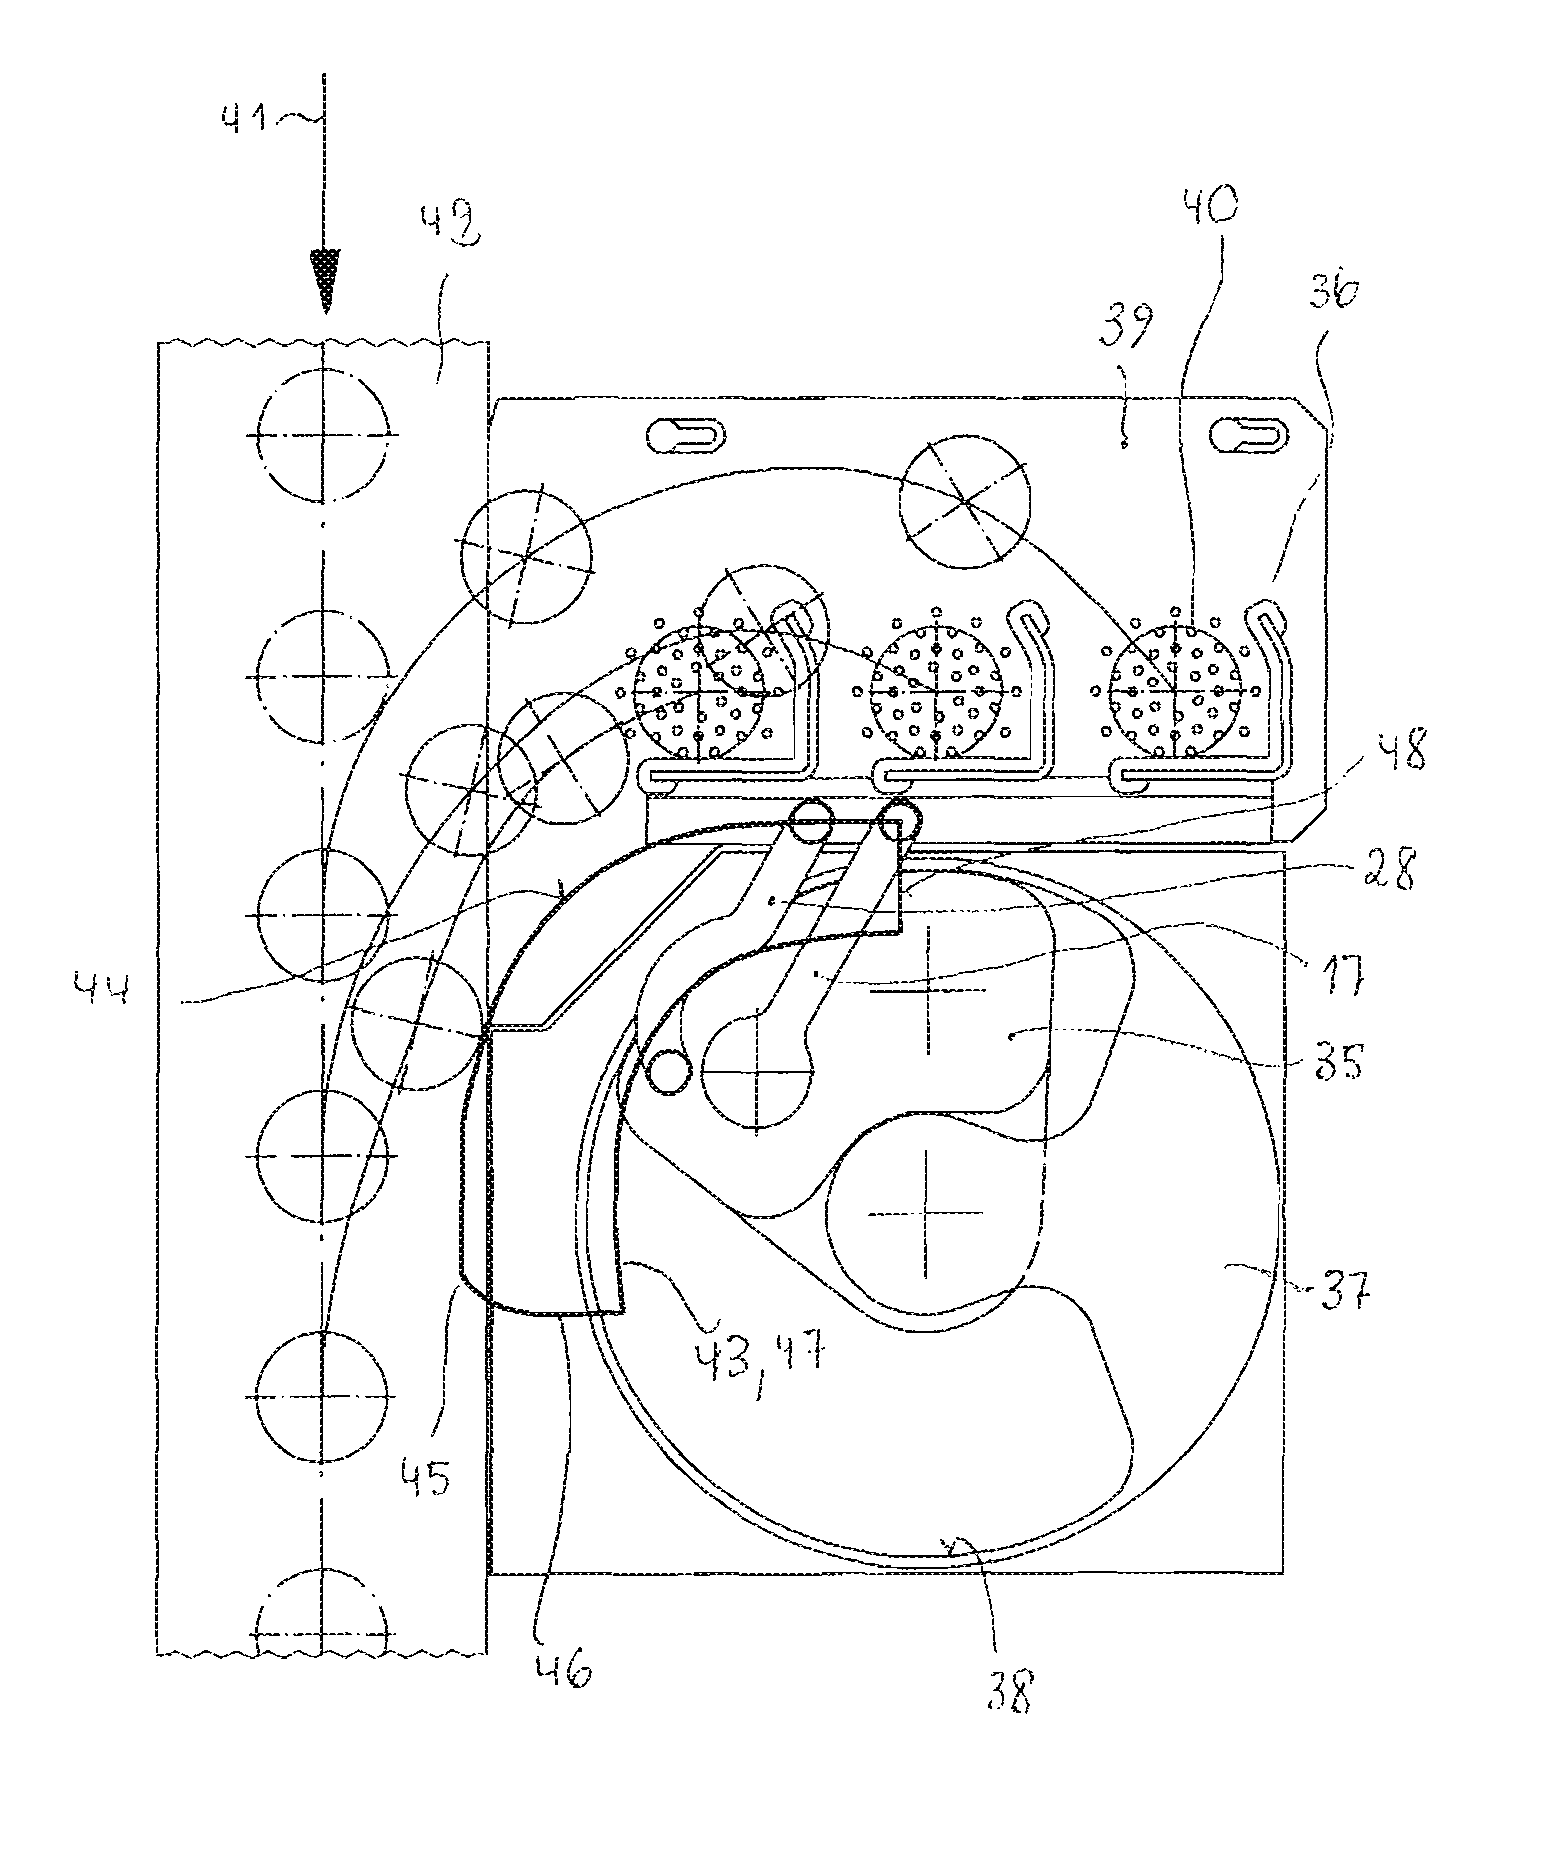 Device for pushing glass objects onto a conveyor belt